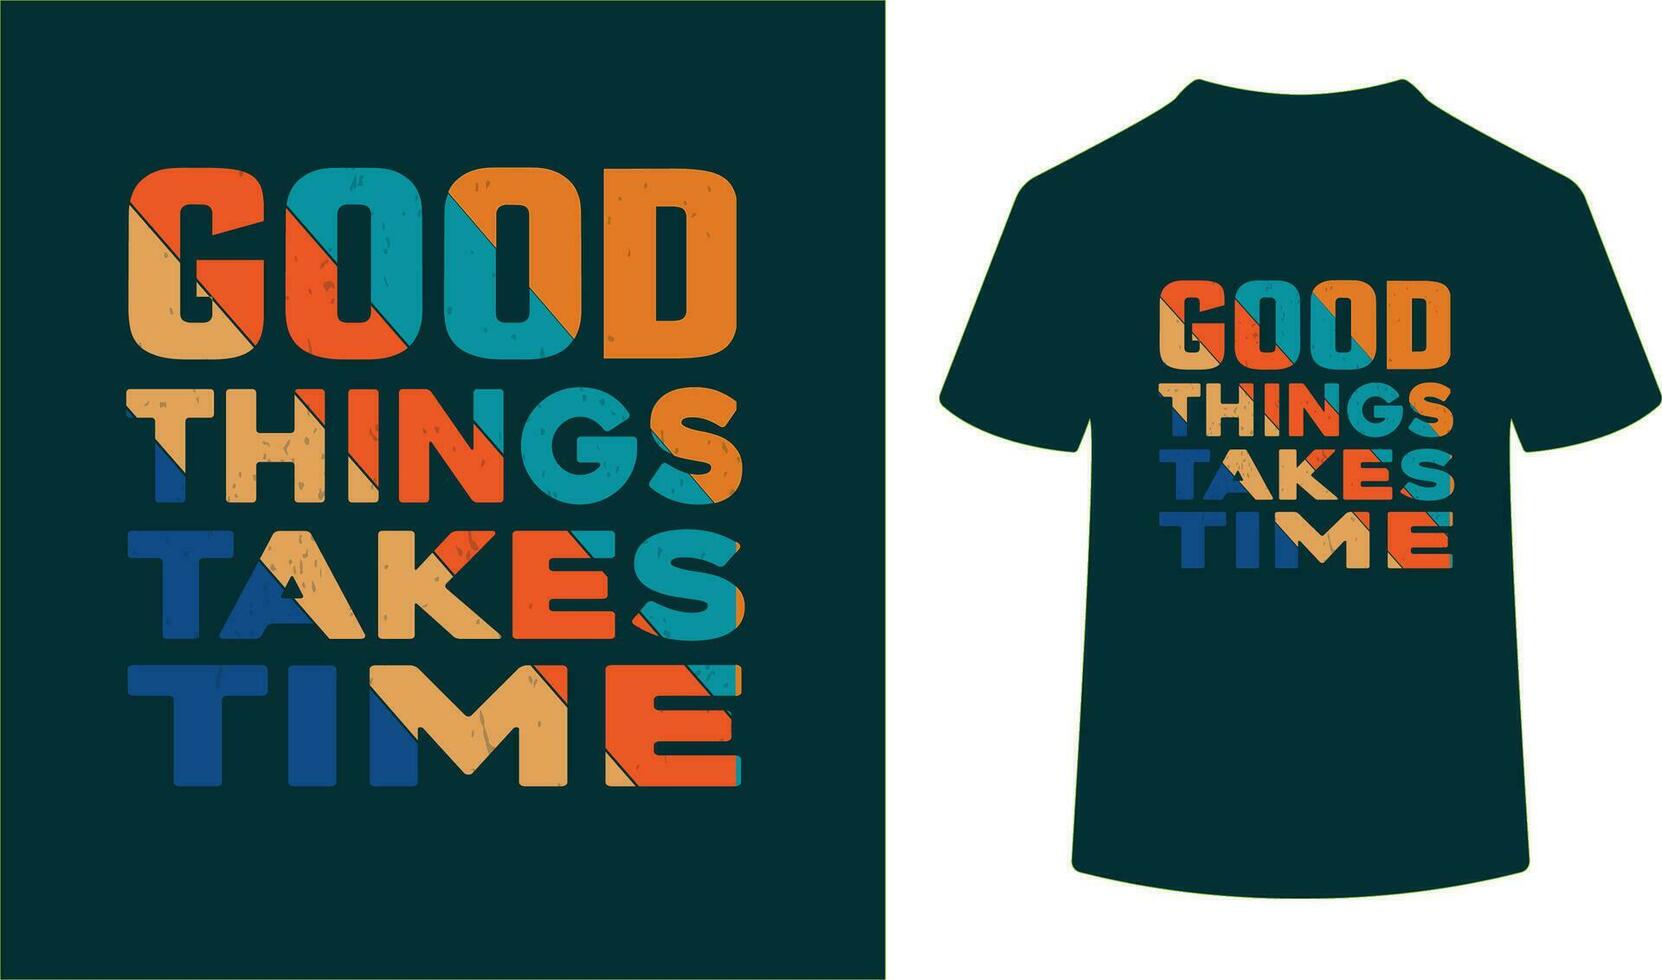 GOOD THINGS TAKES TIME-MOTIVATIONAL QUOTE vector